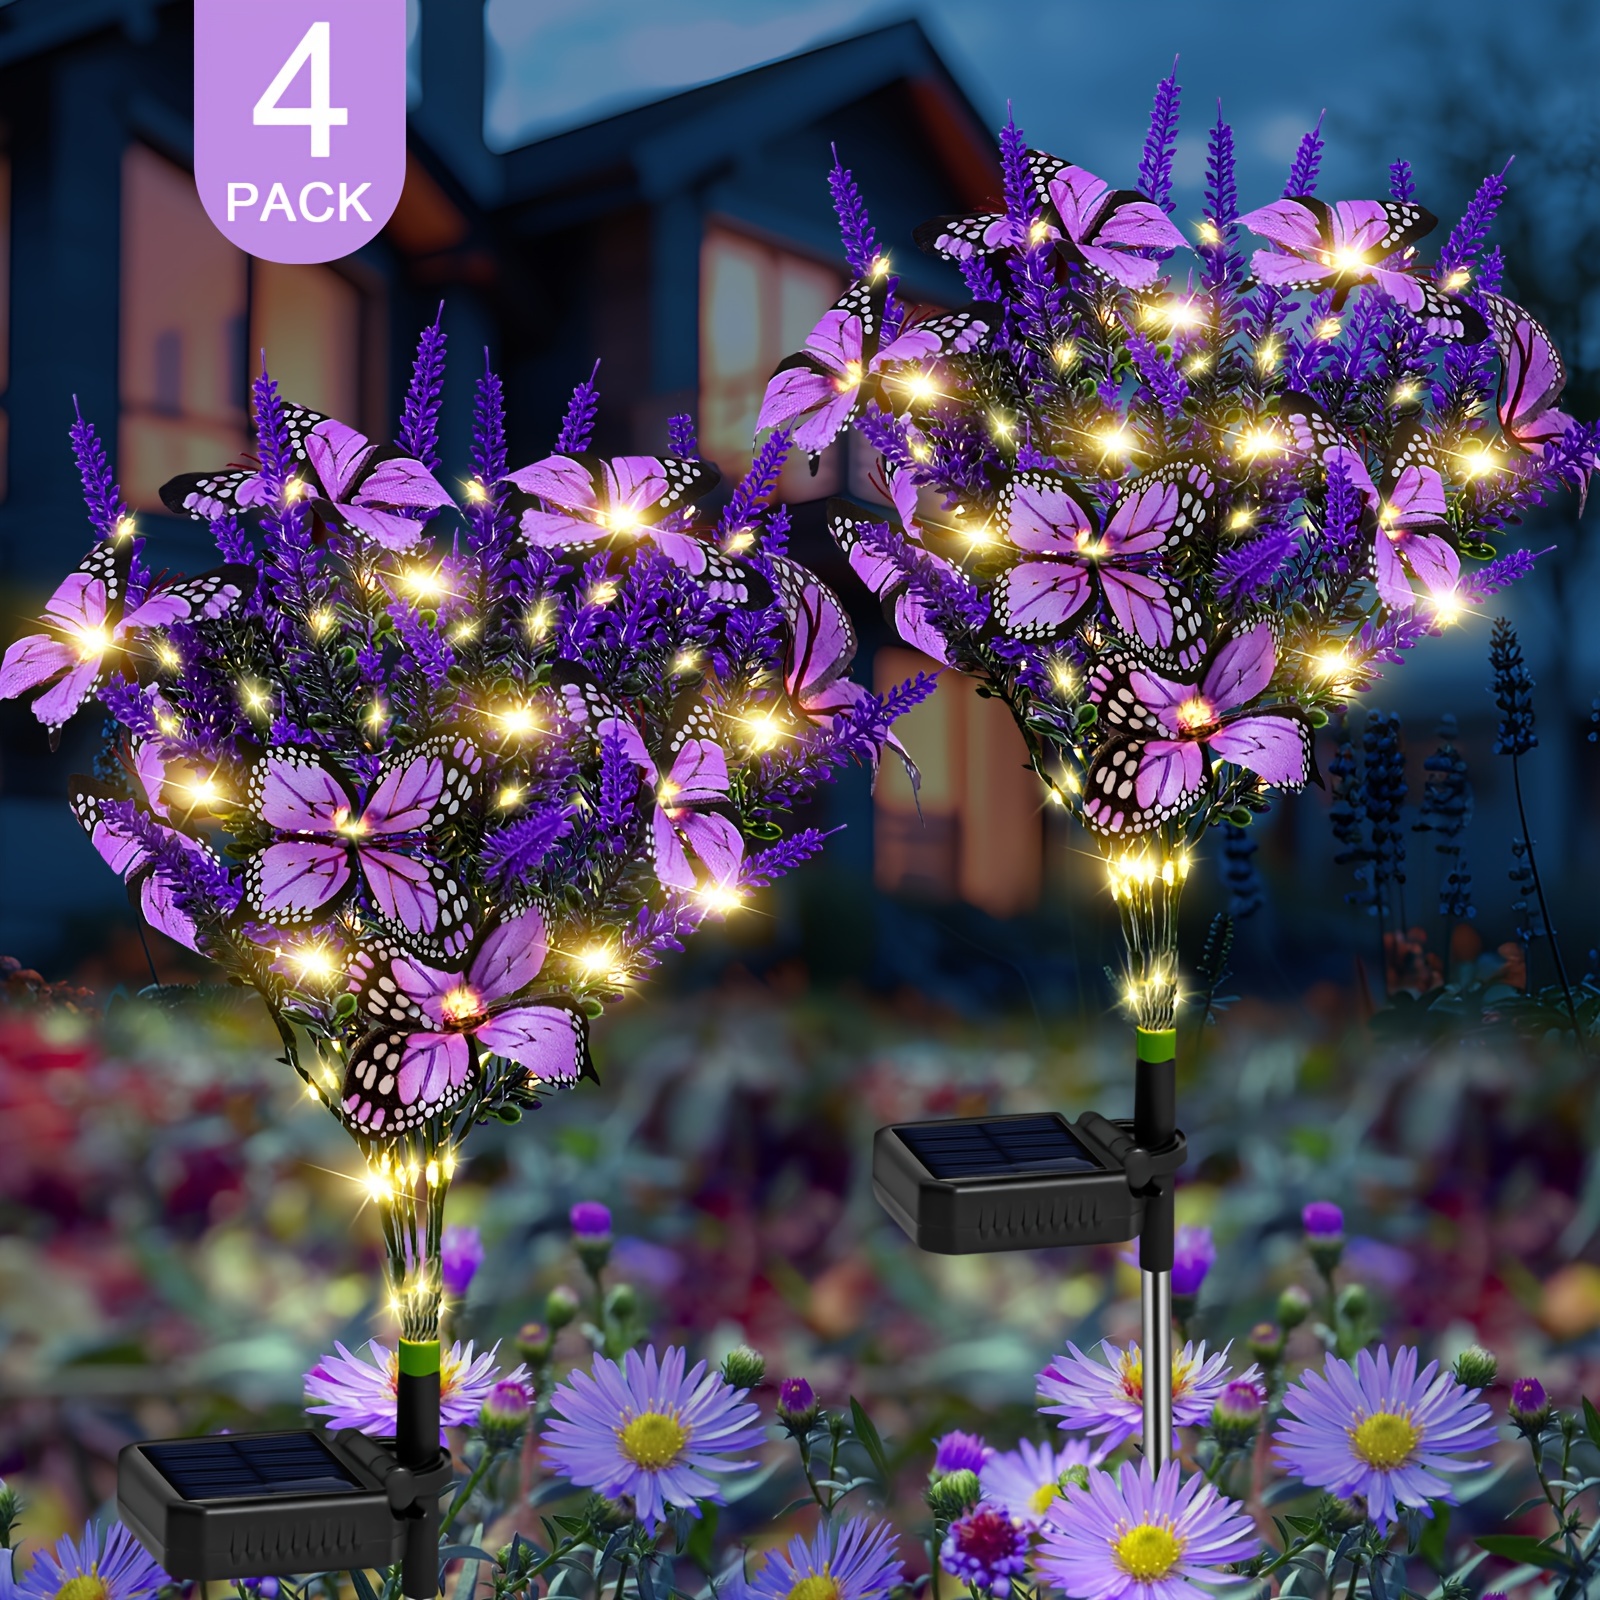 

4 Pack, , Solar Lavender Butterfly Lights, Solar Lights Outdoor Decoration, Swaying By Wind, Yard Patio Pathway Lawn Courtyard Decoration